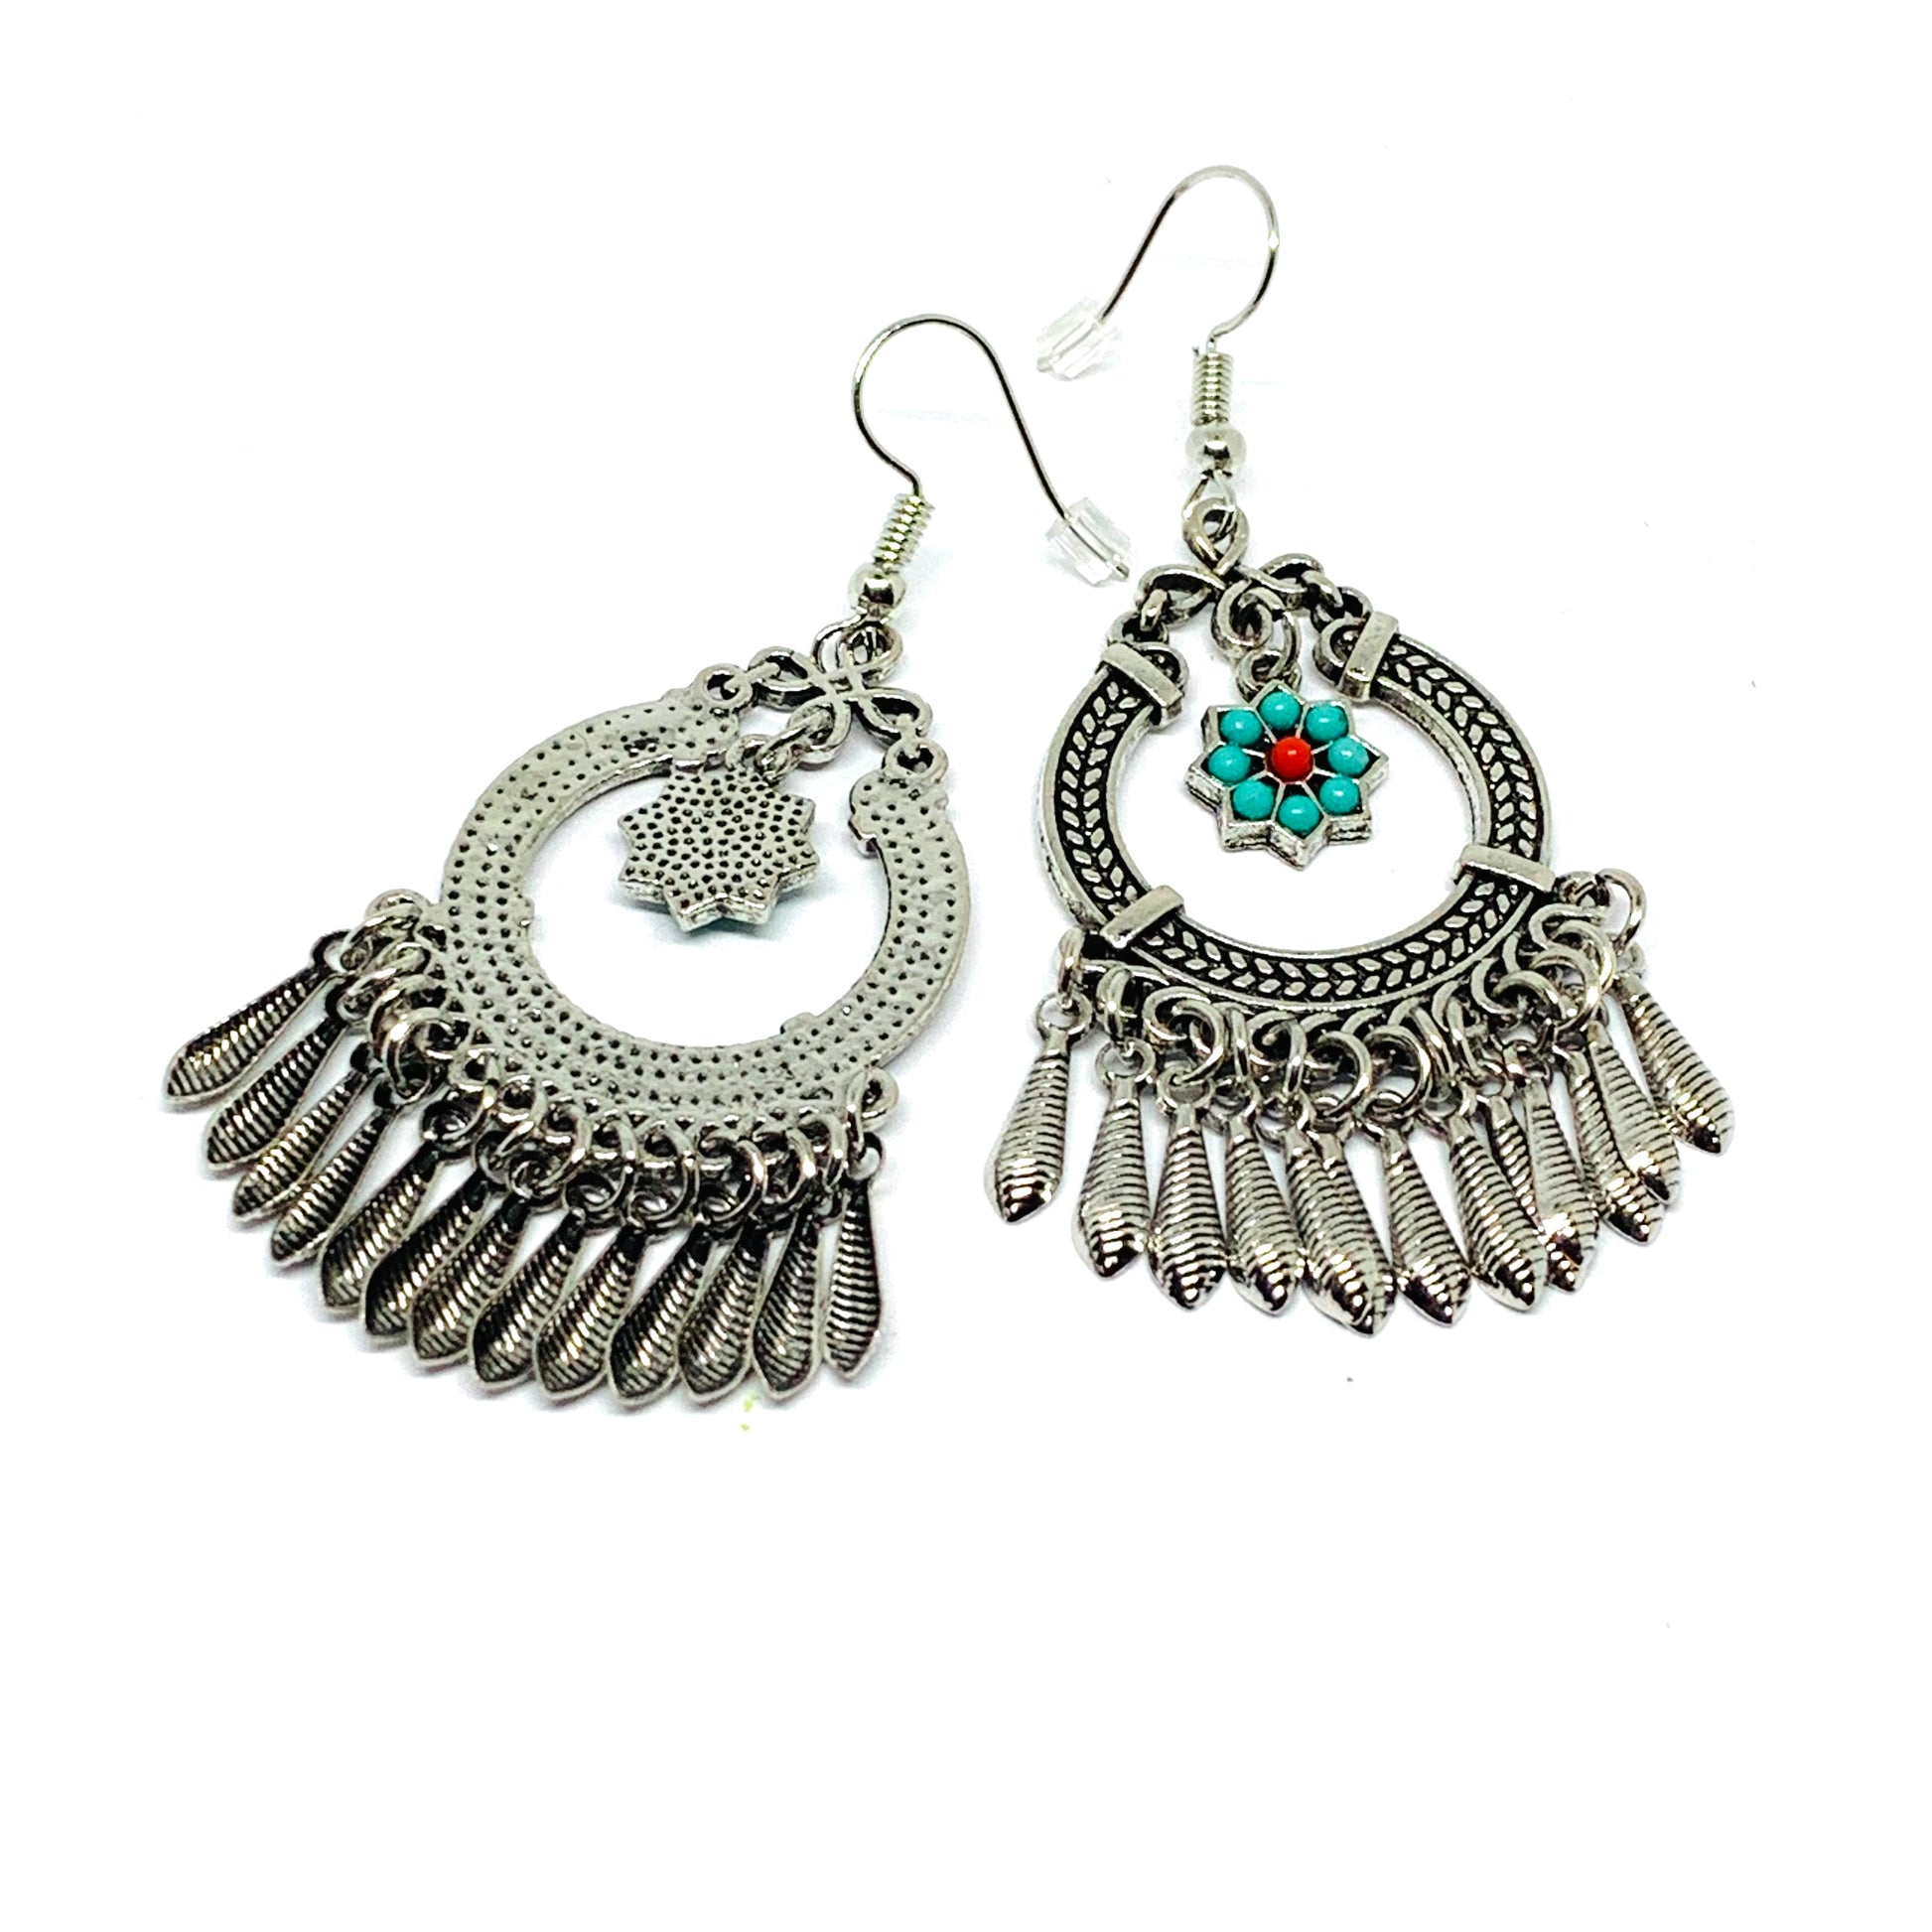 Mexican Silver tone chandeleir drop and dangle earrings with turquoise color beaded daisy flower for women. Mexican earrings. Mexican jewelry for fridamaniacs, fridalovers. Light weight statement earrings. Mexico folk art to wear.